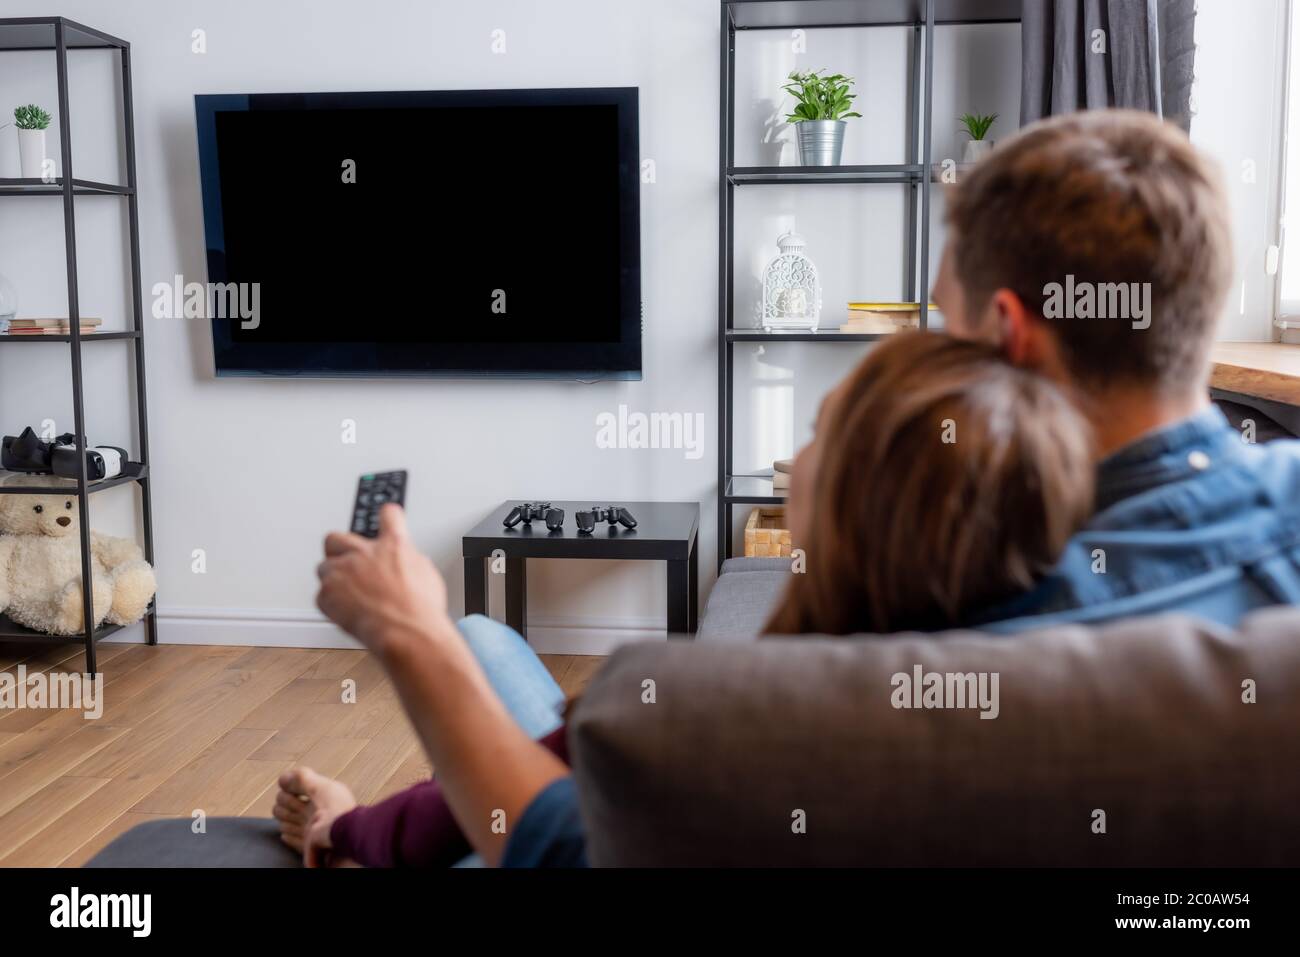 selective focus of man holding remote controller and looking at flat panel tv with blank screen near woman in living room Stock Photo